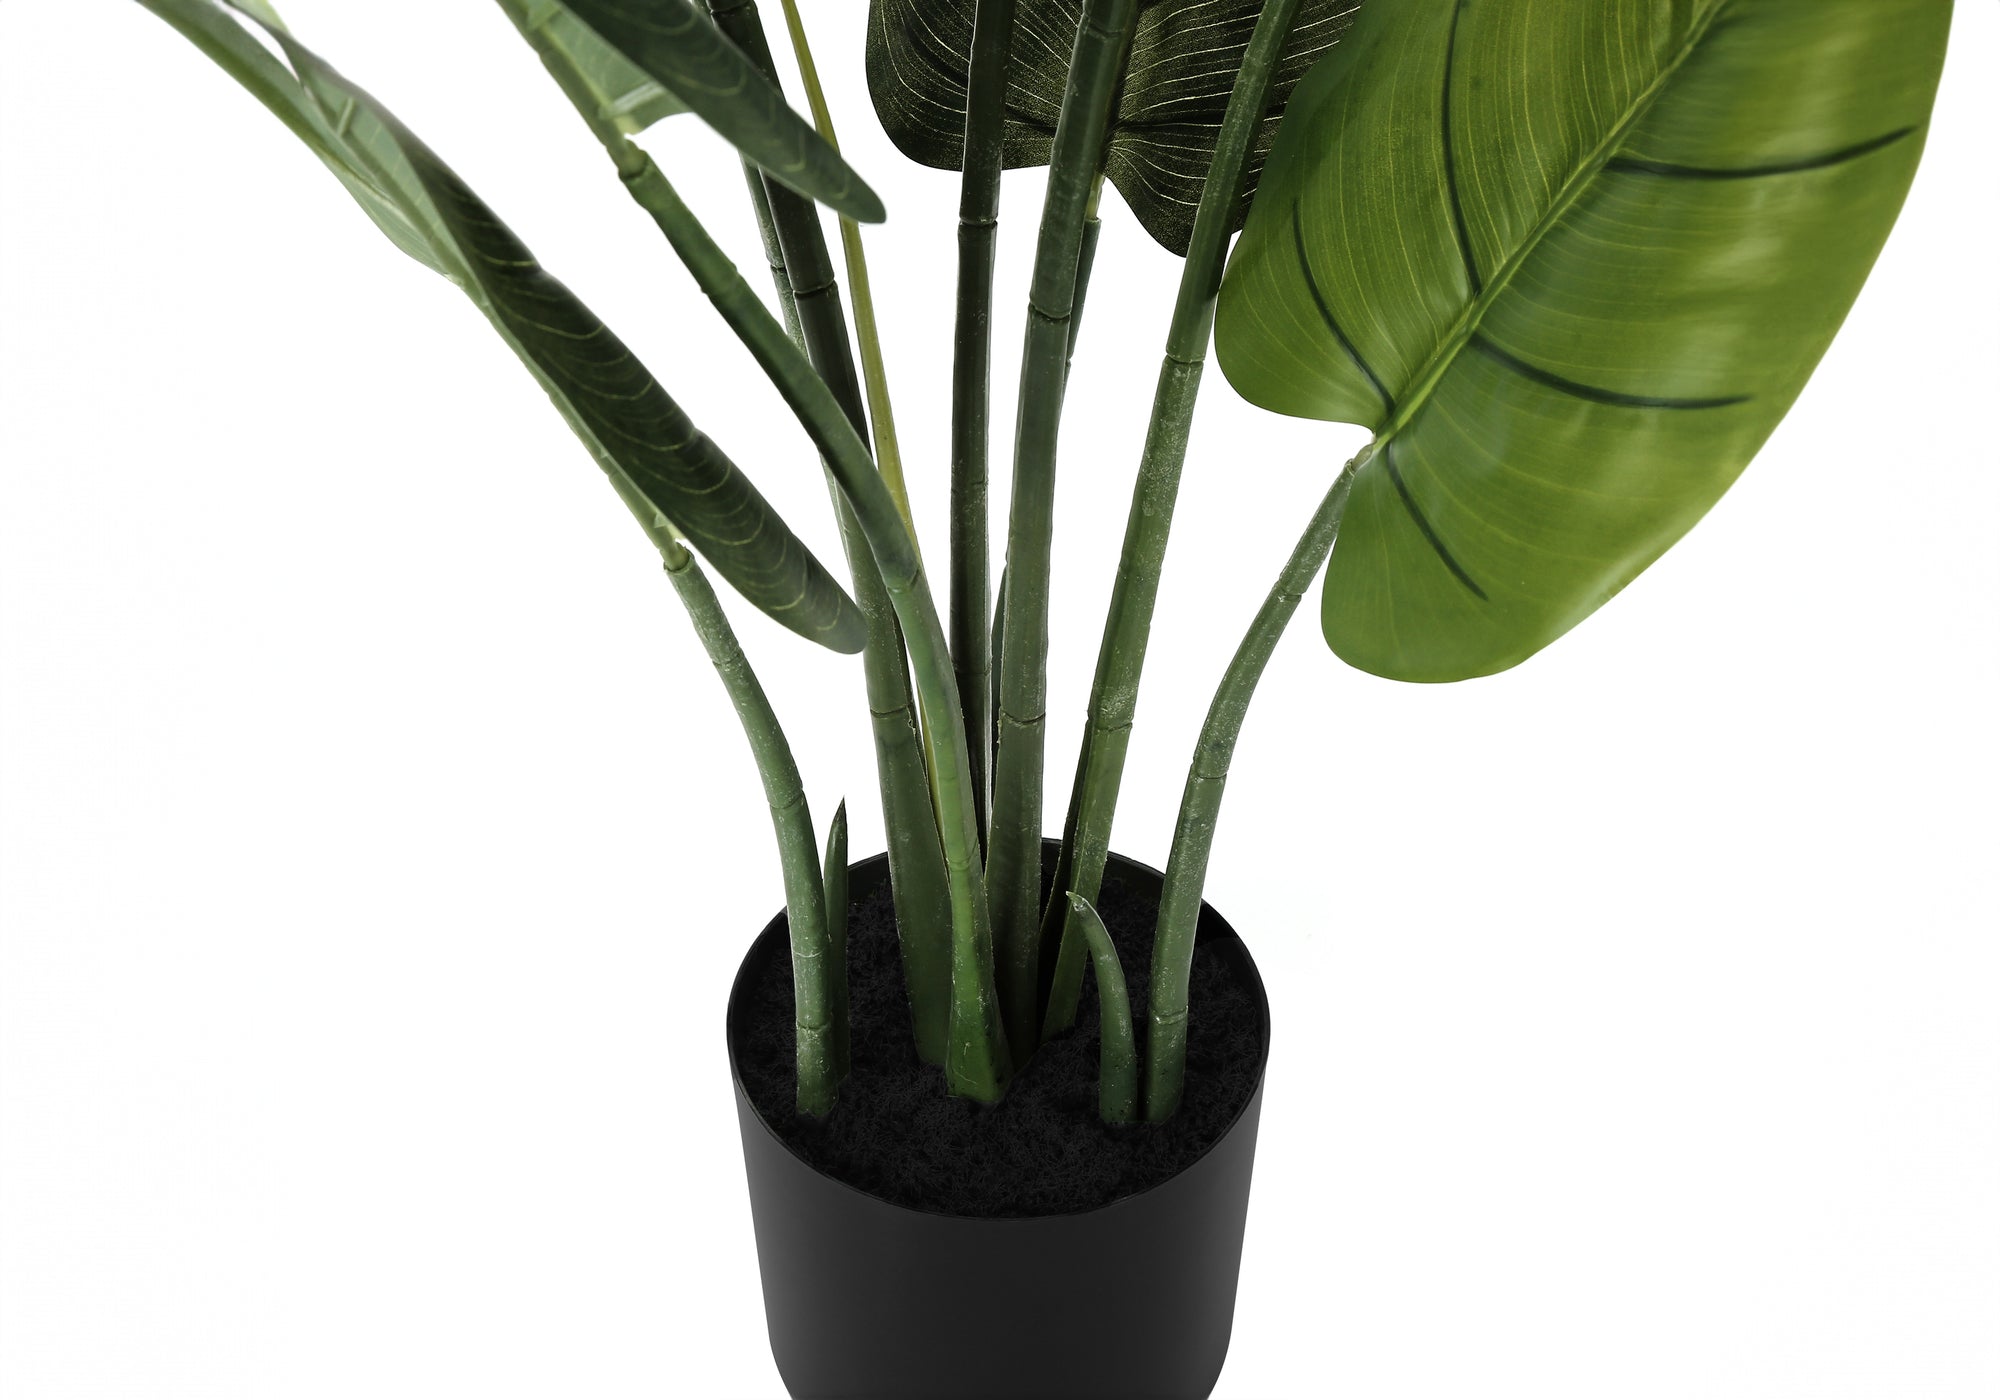 MN-309509    Artificial Plant, 37" Tall, Aureum Tree, Indoor, Faux, Fake, Floor, Greenery, Potted, Real Touch, Decorative, Green Leaves, Black Pot